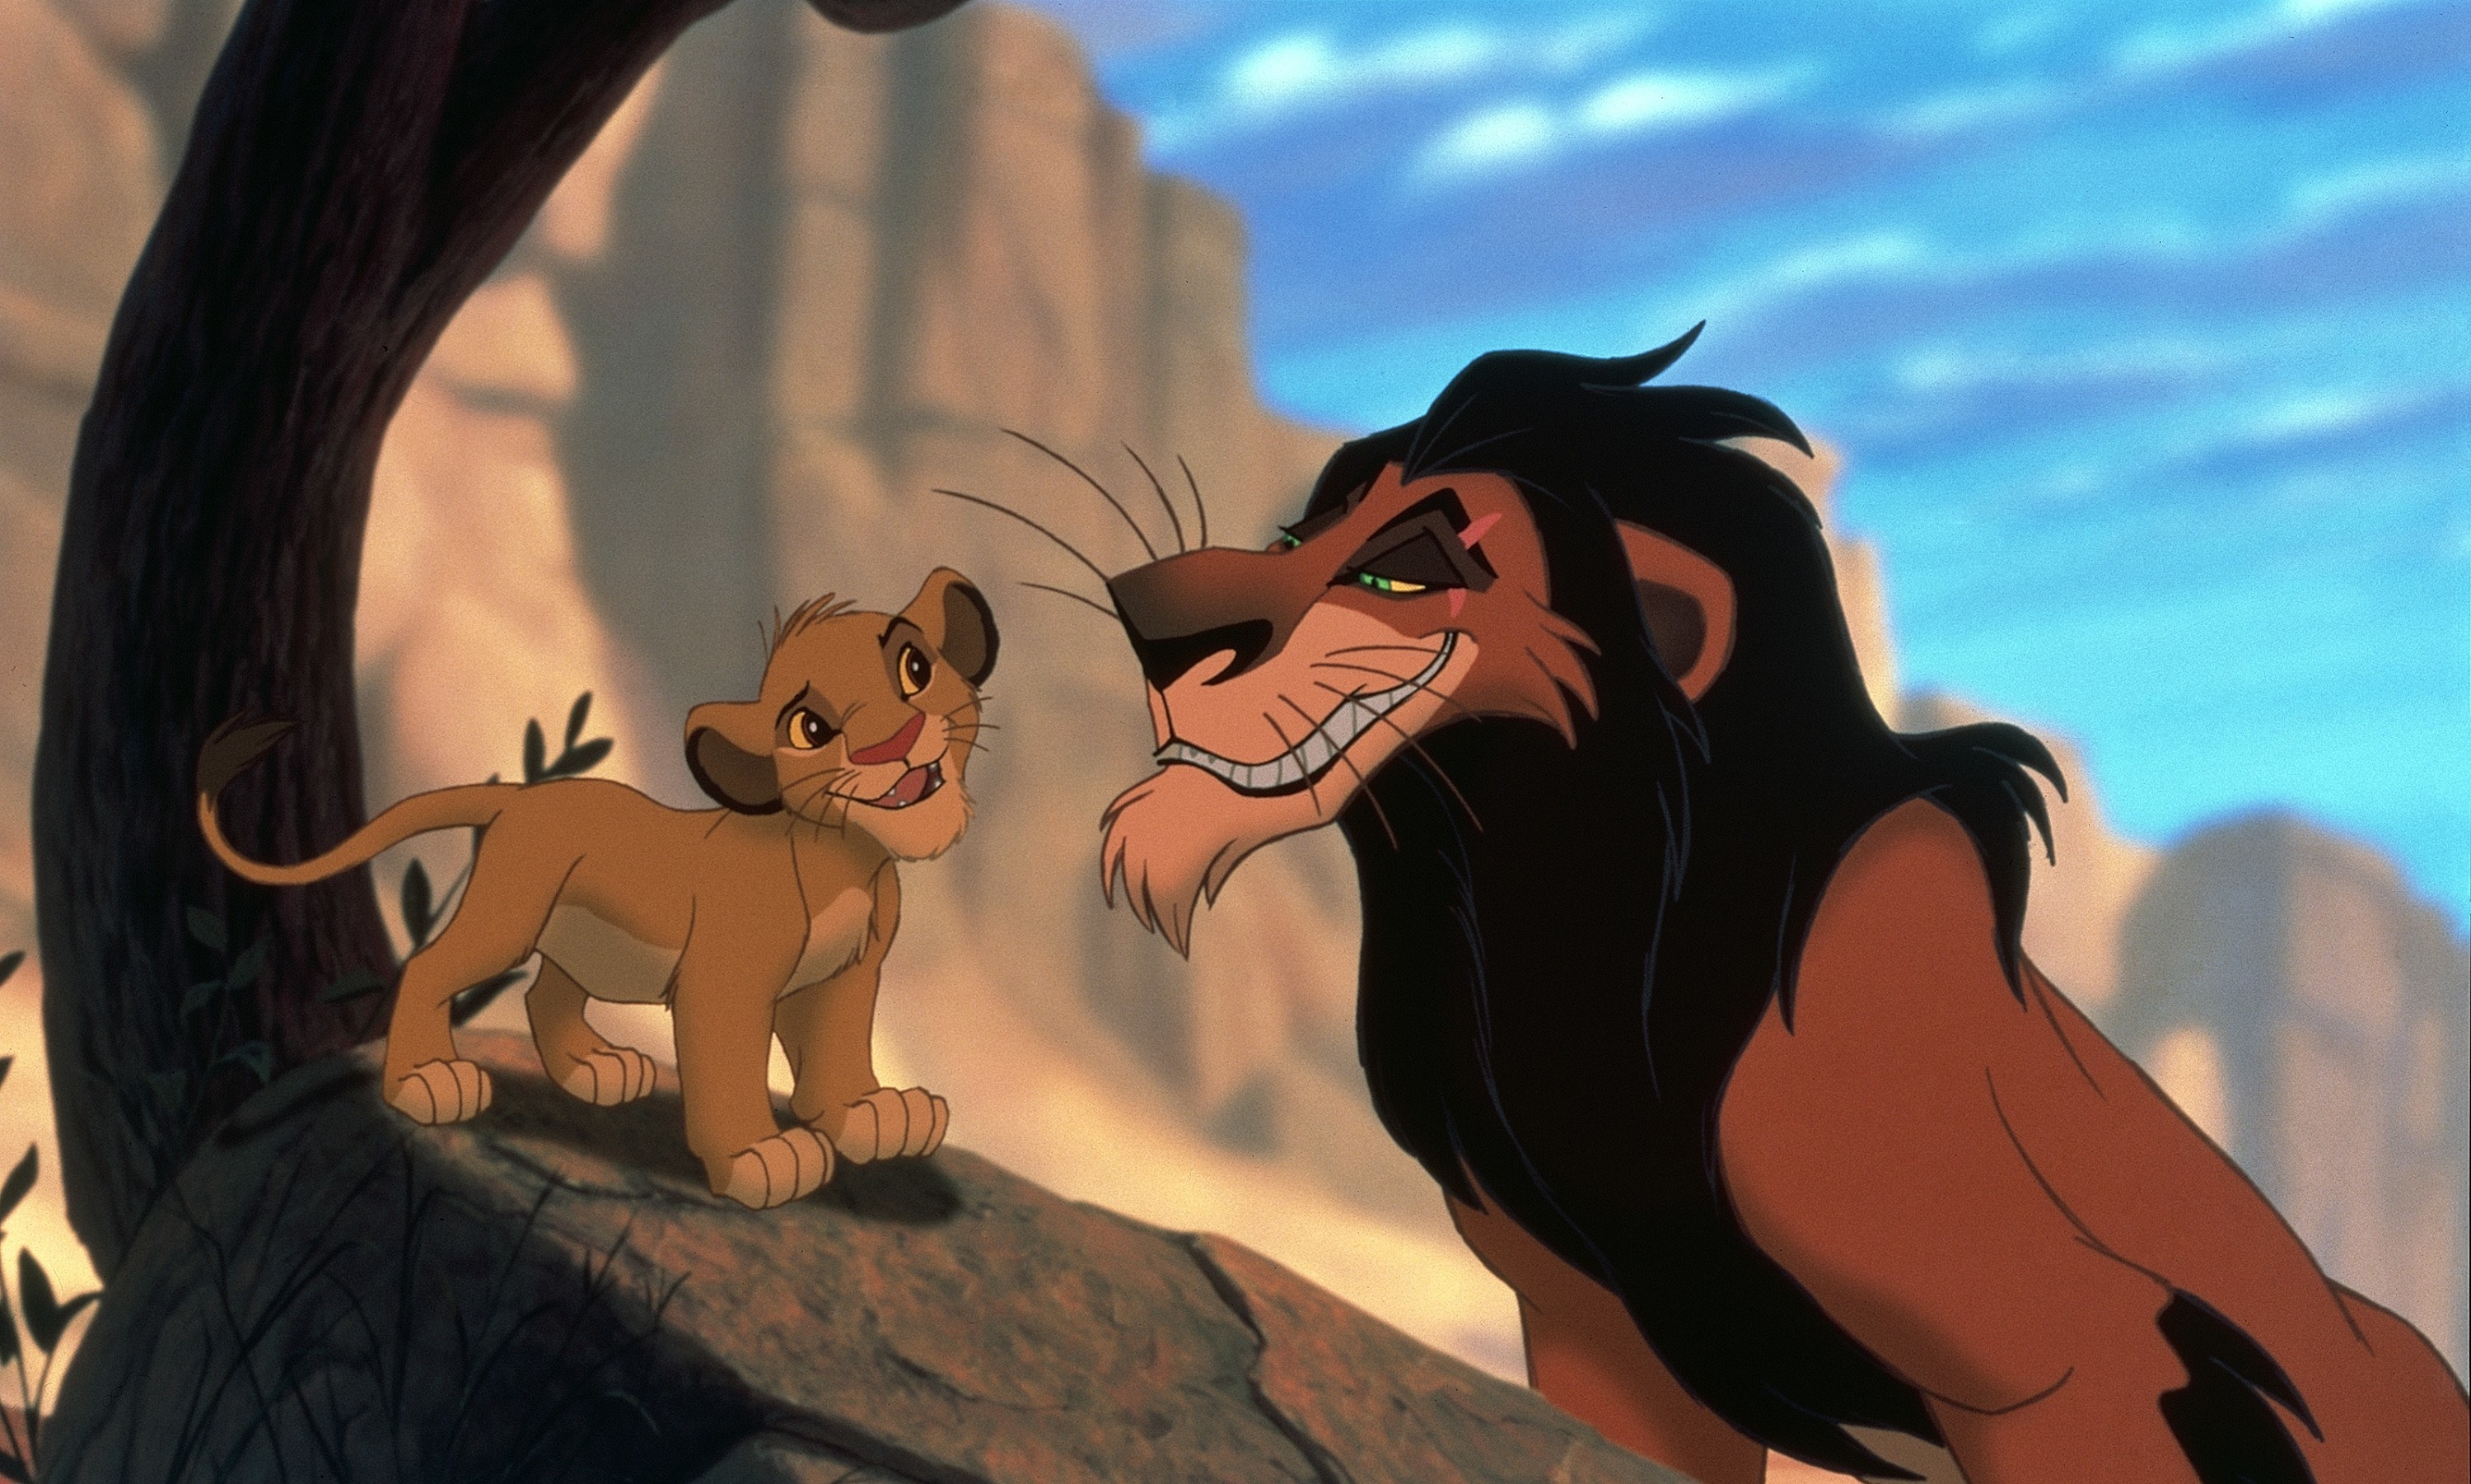 Scar and a young Simba